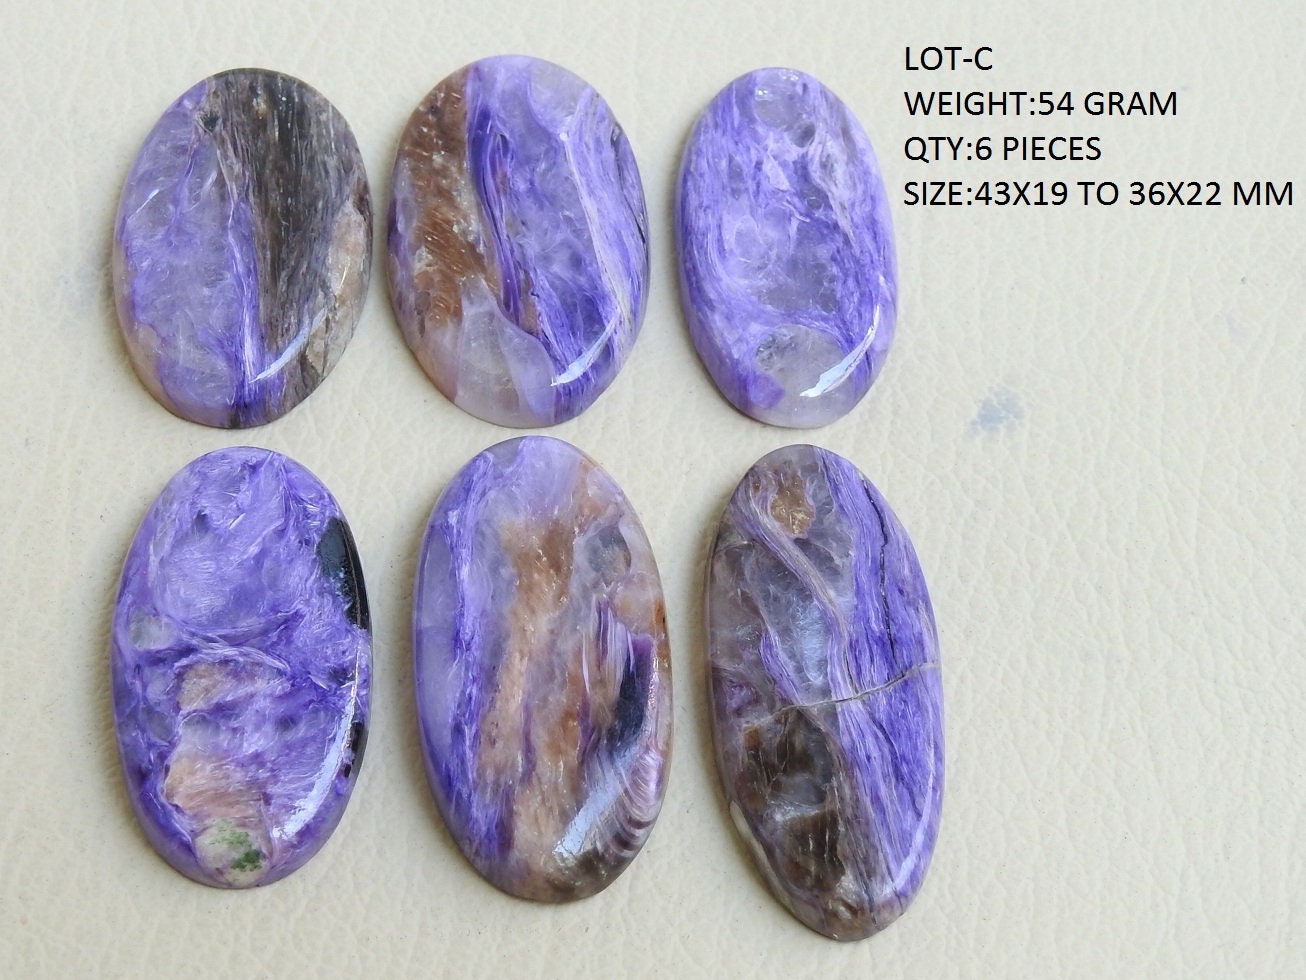 Charoite Smooth Cabochons Lot,Loose Stone,Fancy Shape,Handmade,Gemstone For Making Pendent,Jewelry Wholesale Price New Arrival C3 | Save 33% - Rajasthan Living 16